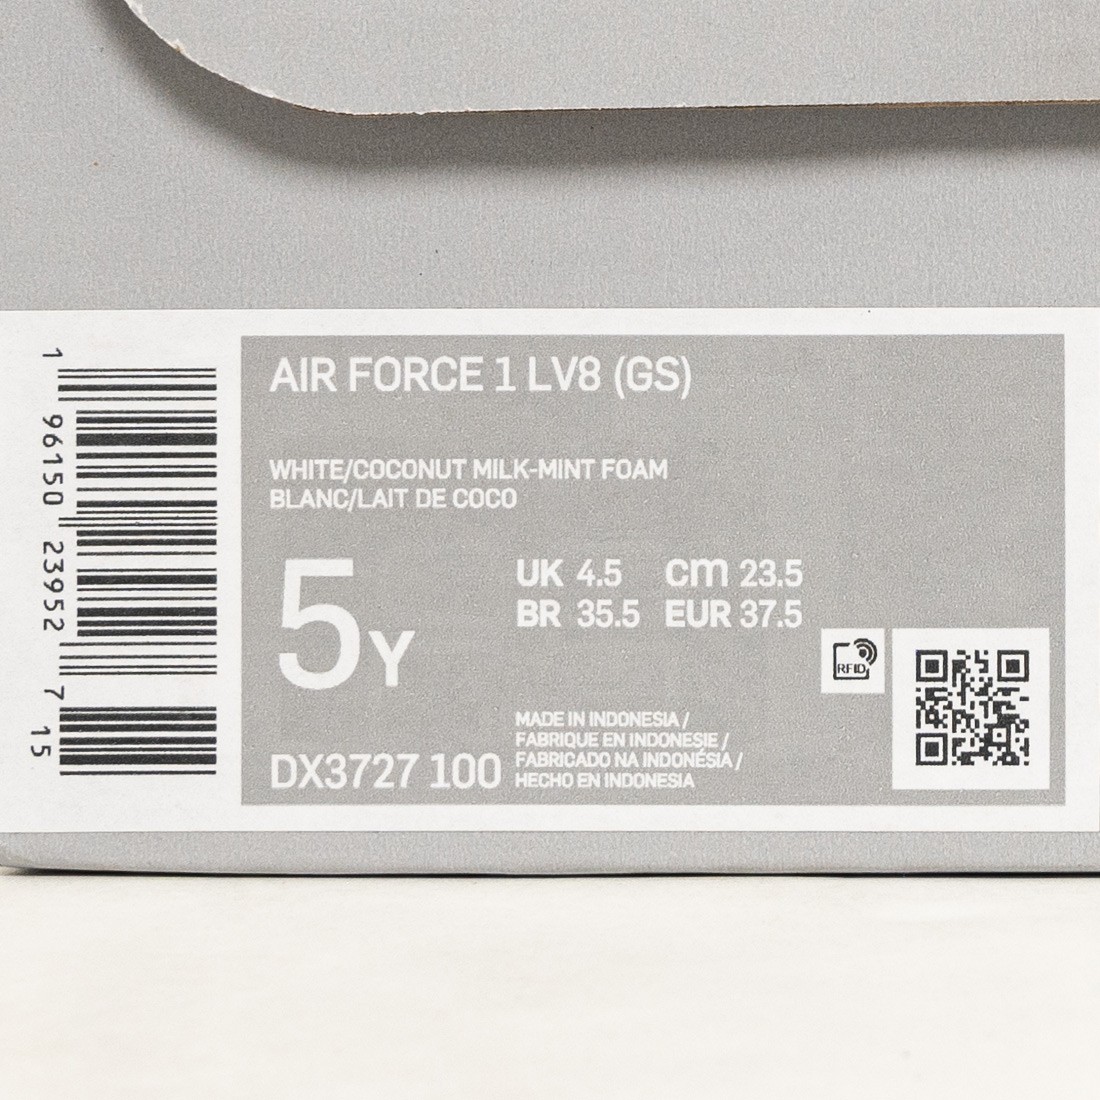 (GS) AIR FORCE 1 LV8 DX3727 100